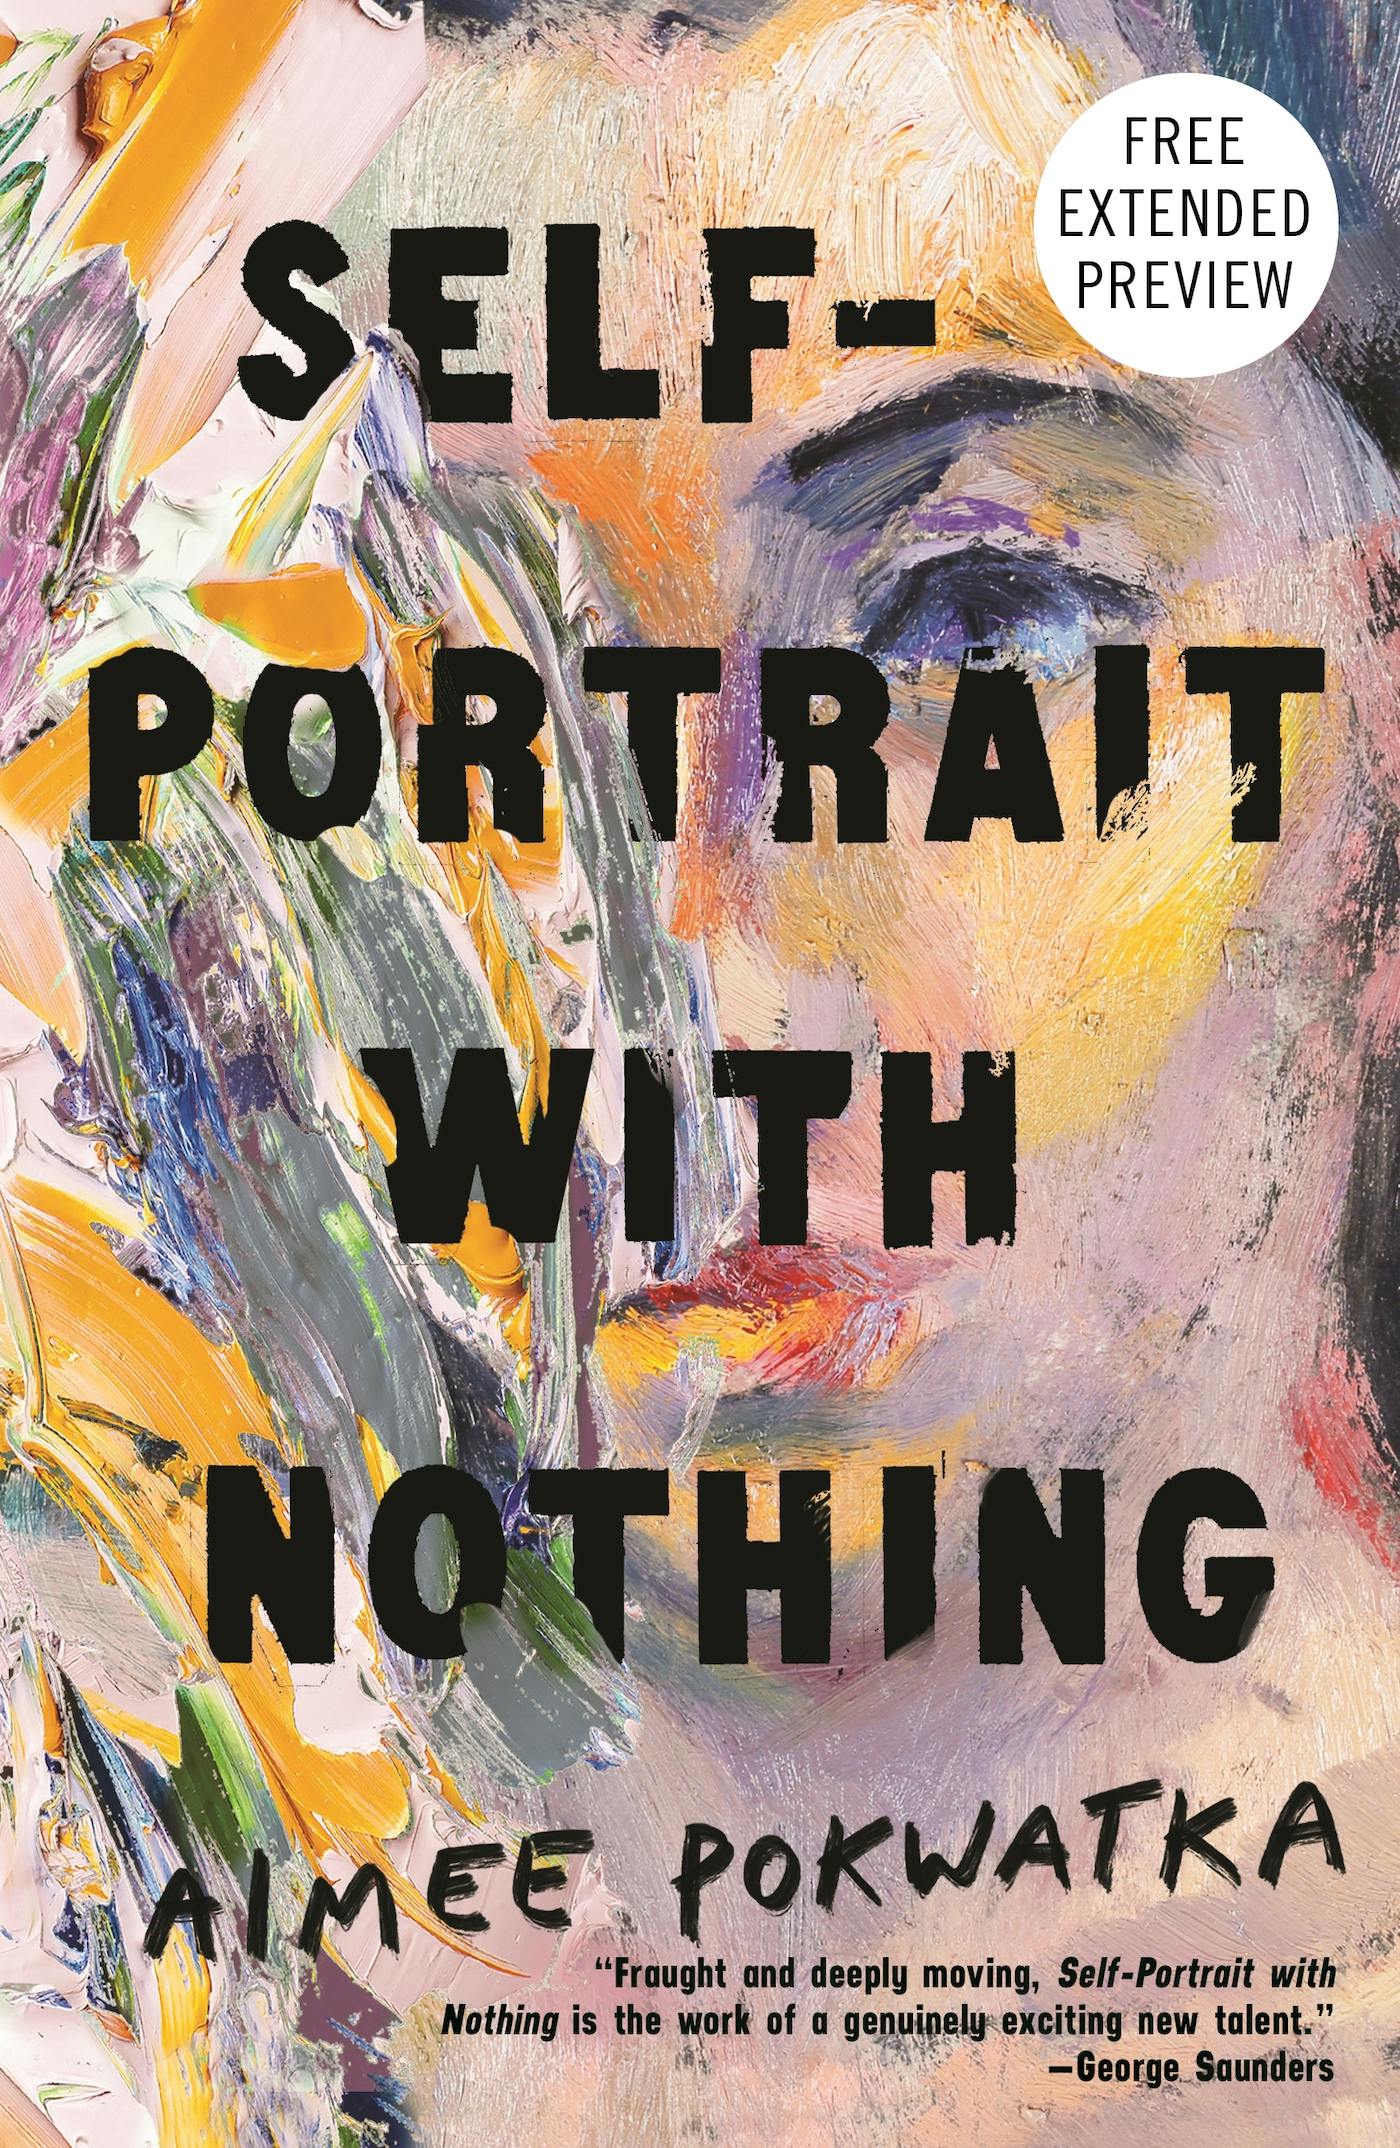 Cover for the book titled as: Self-Portrait with Nothing Sneak Peek